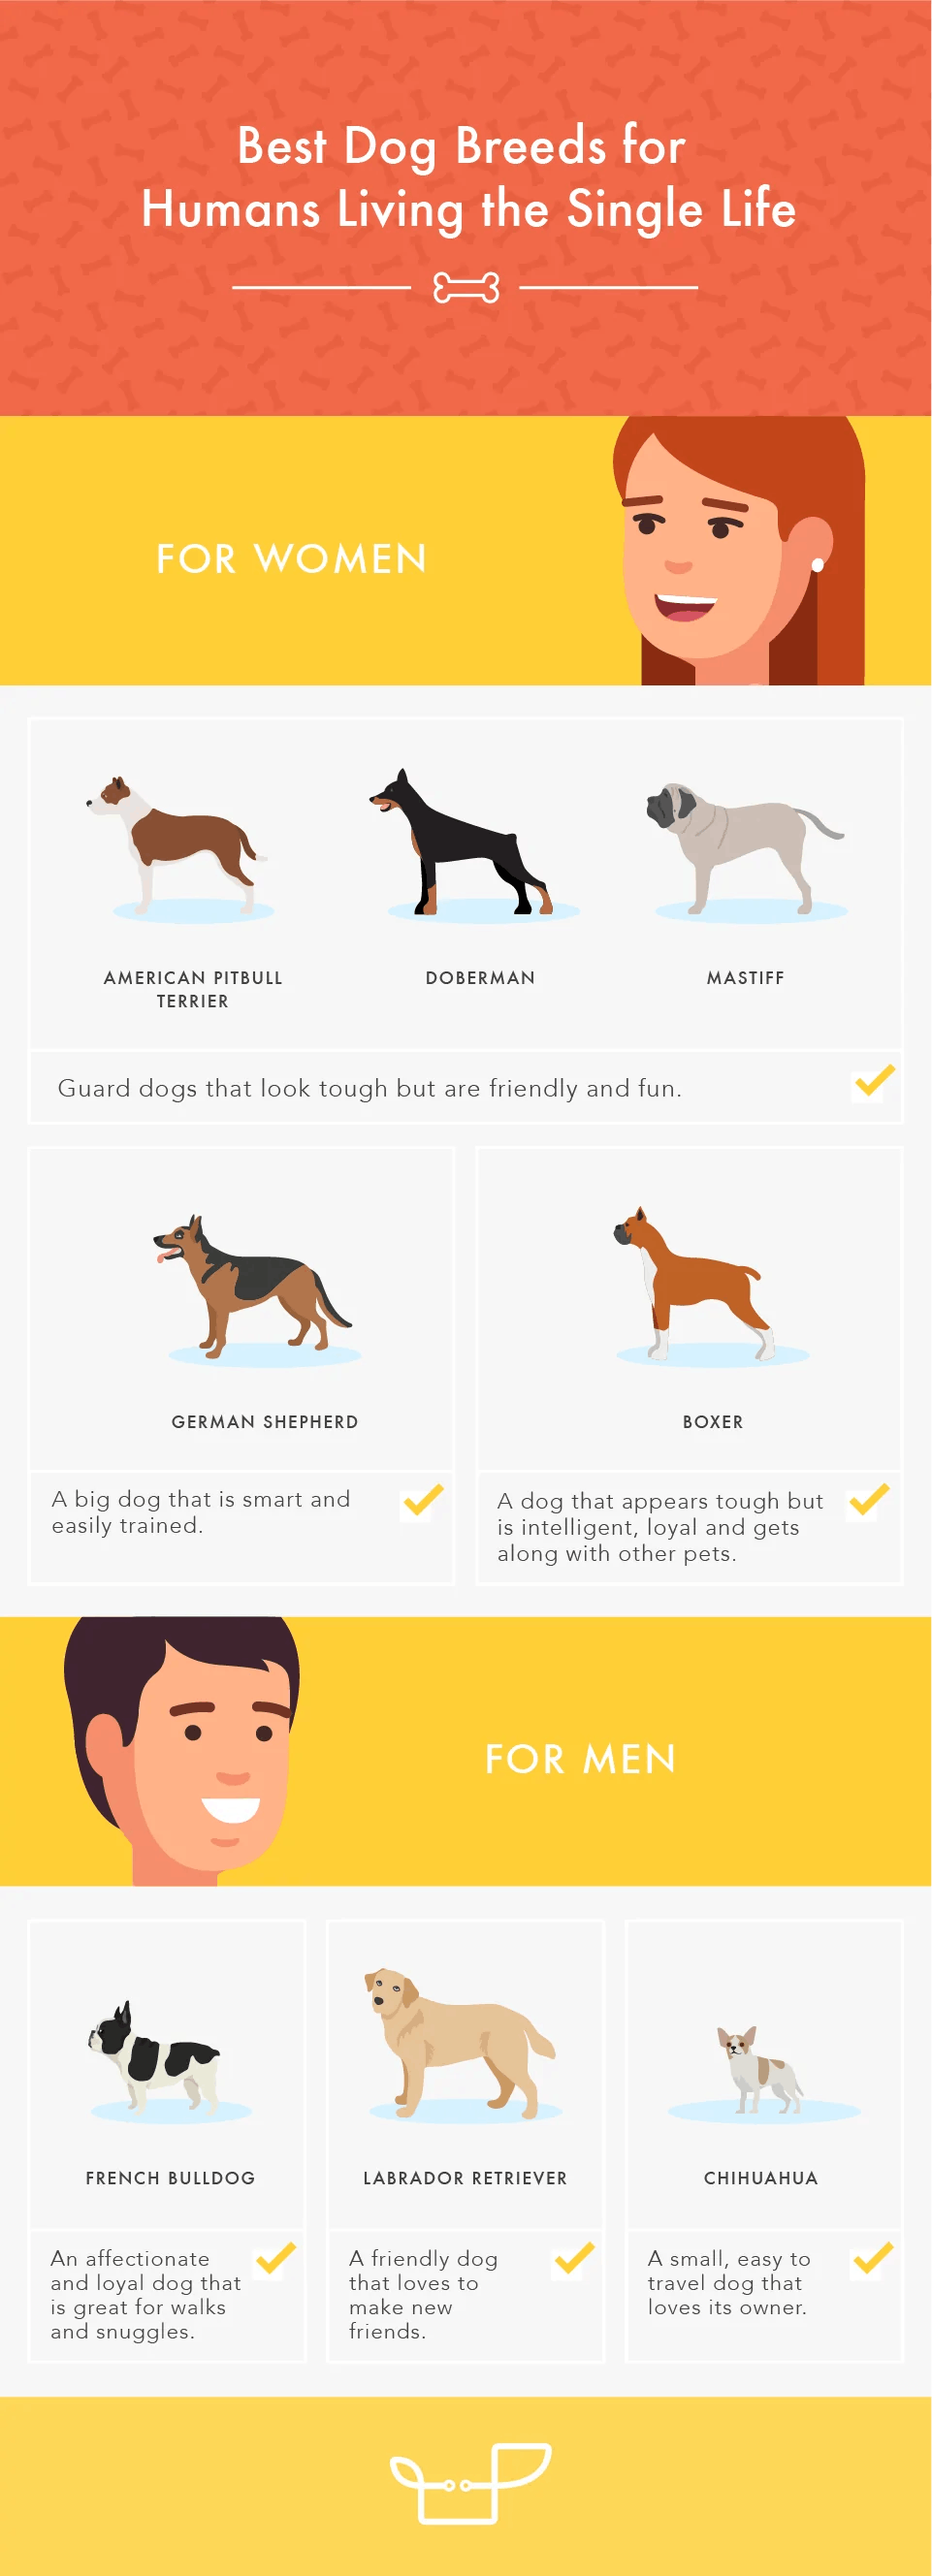 what dogs make good pets